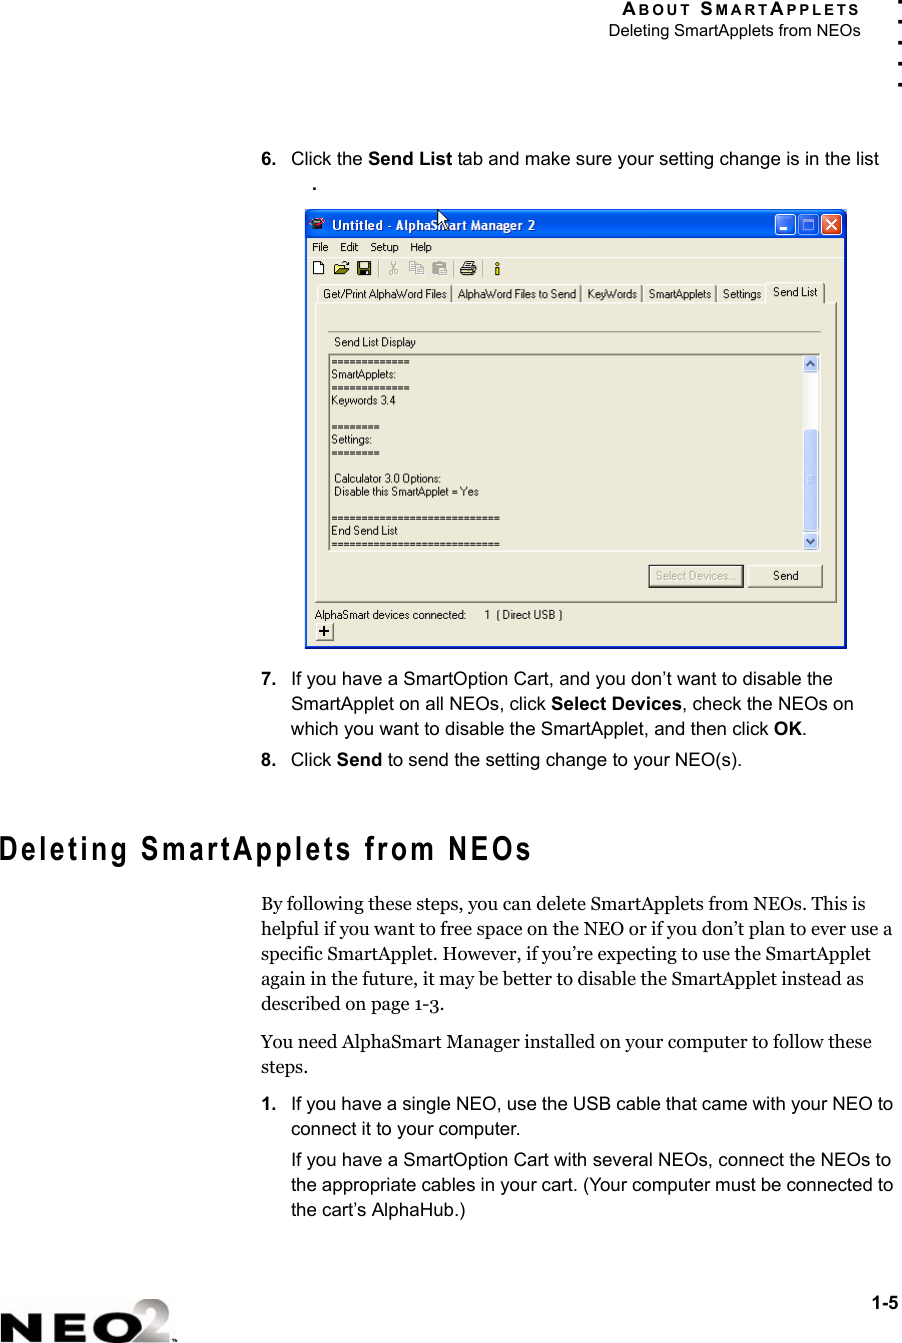 ABOUT SMARTAPPLETSDeleting SmartApplets from NEOs1-5. . . . .6. Click the Send List tab and make sure your setting change is in the list .7. If you have a SmartOption Cart, and you don’t want to disable the SmartApplet on all NEOs, click Select Devices, check the NEOs on which you want to disable the SmartApplet, and then click OK.8. Click Send to send the setting change to your NEO(s).Deleting SmartApplets from NEOsBy following these steps, you can delete SmartApplets from NEOs. This is helpful if you want to free space on the NEO or if you don’t plan to ever use a specific SmartApplet. However, if you’re expecting to use the SmartApplet again in the future, it may be better to disable the SmartApplet instead as described on page 1-3.You need AlphaSmart Manager installed on your computer to follow these steps.1. If you have a single NEO, use the USB cable that came with your NEO to connect it to your computer.If you have a SmartOption Cart with several NEOs, connect the NEOs to the appropriate cables in your cart. (Your computer must be connected to the cart’s AlphaHub.)